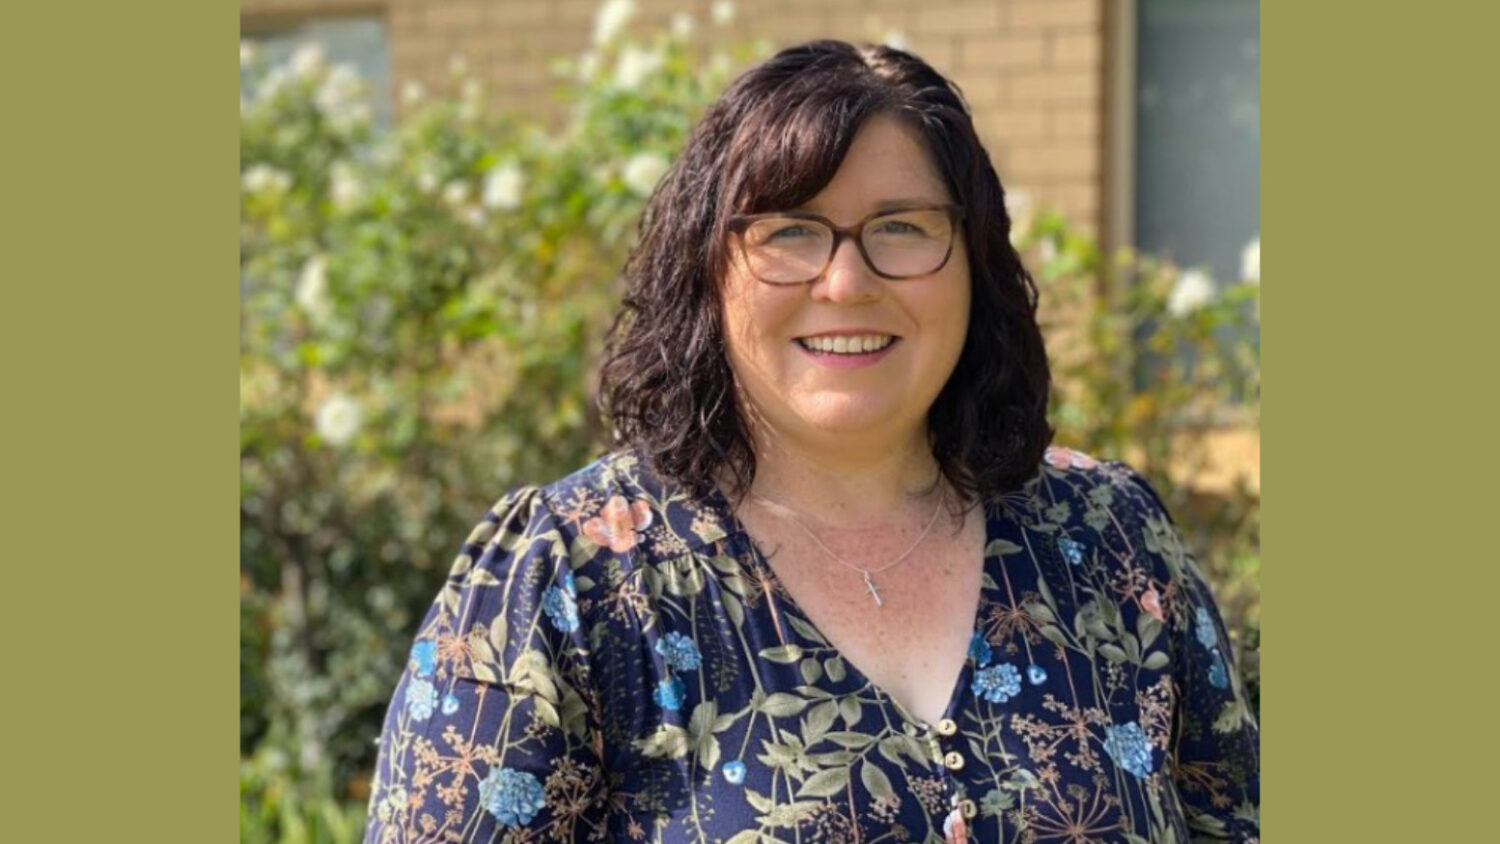 Former St Joseph’s Parish School Condobolin educator Paula Leadbitter will take up a new role as the Director of Catholic Education Wilcannia-Forbes from January 2024. Image Credit: Catholic Education Wilcannia-Forbes Facebook Page.